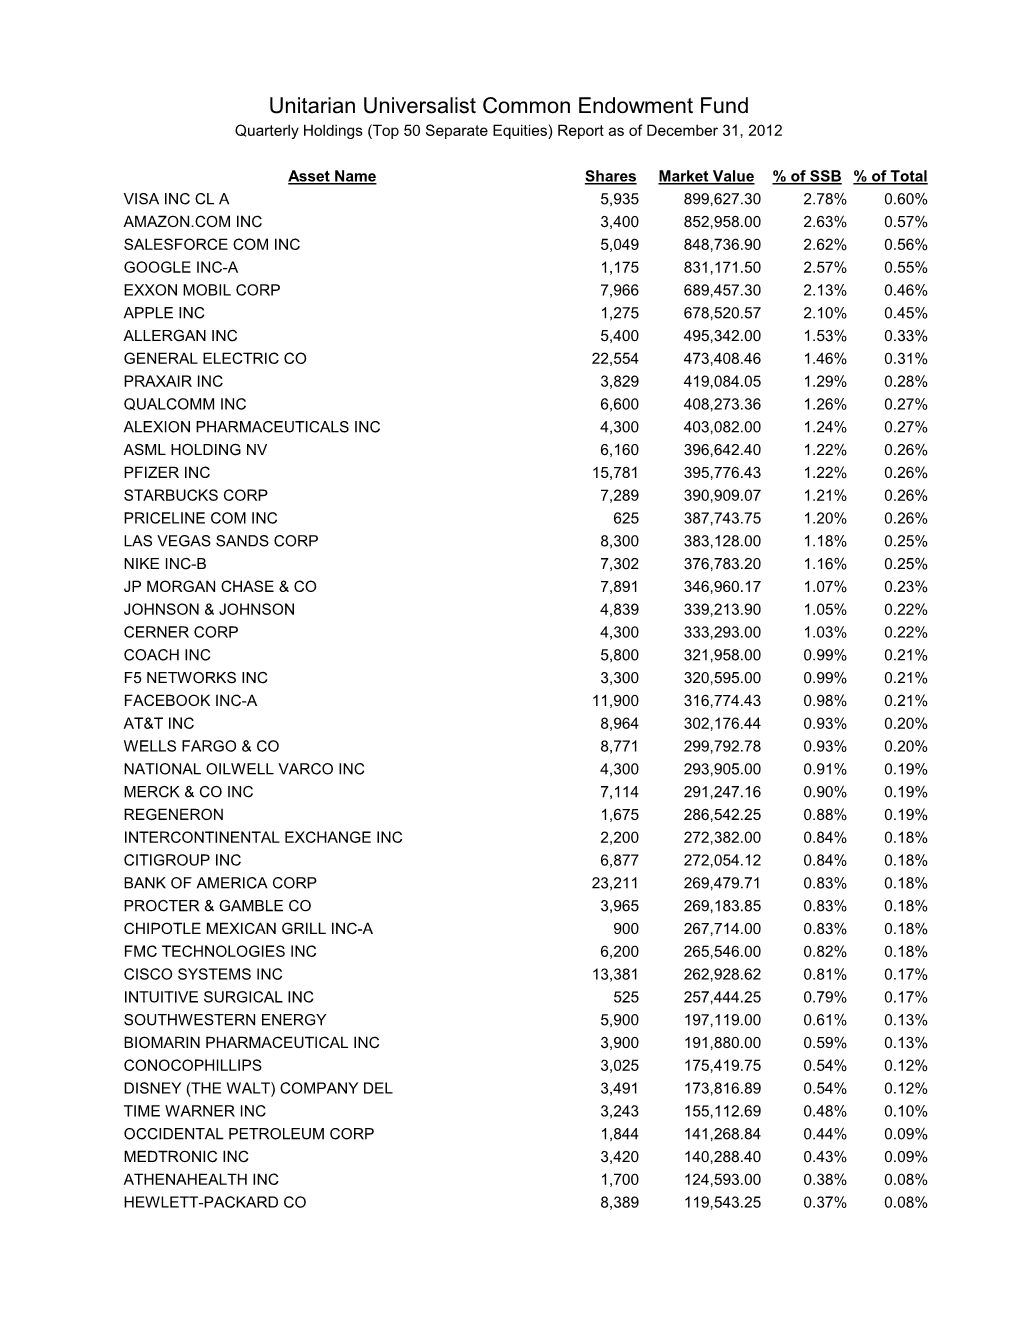 Unitarian Universalist Common Endowment Fund Quarterly Holdings (Top 50 Separate Equities) Report As of December 31, 2012